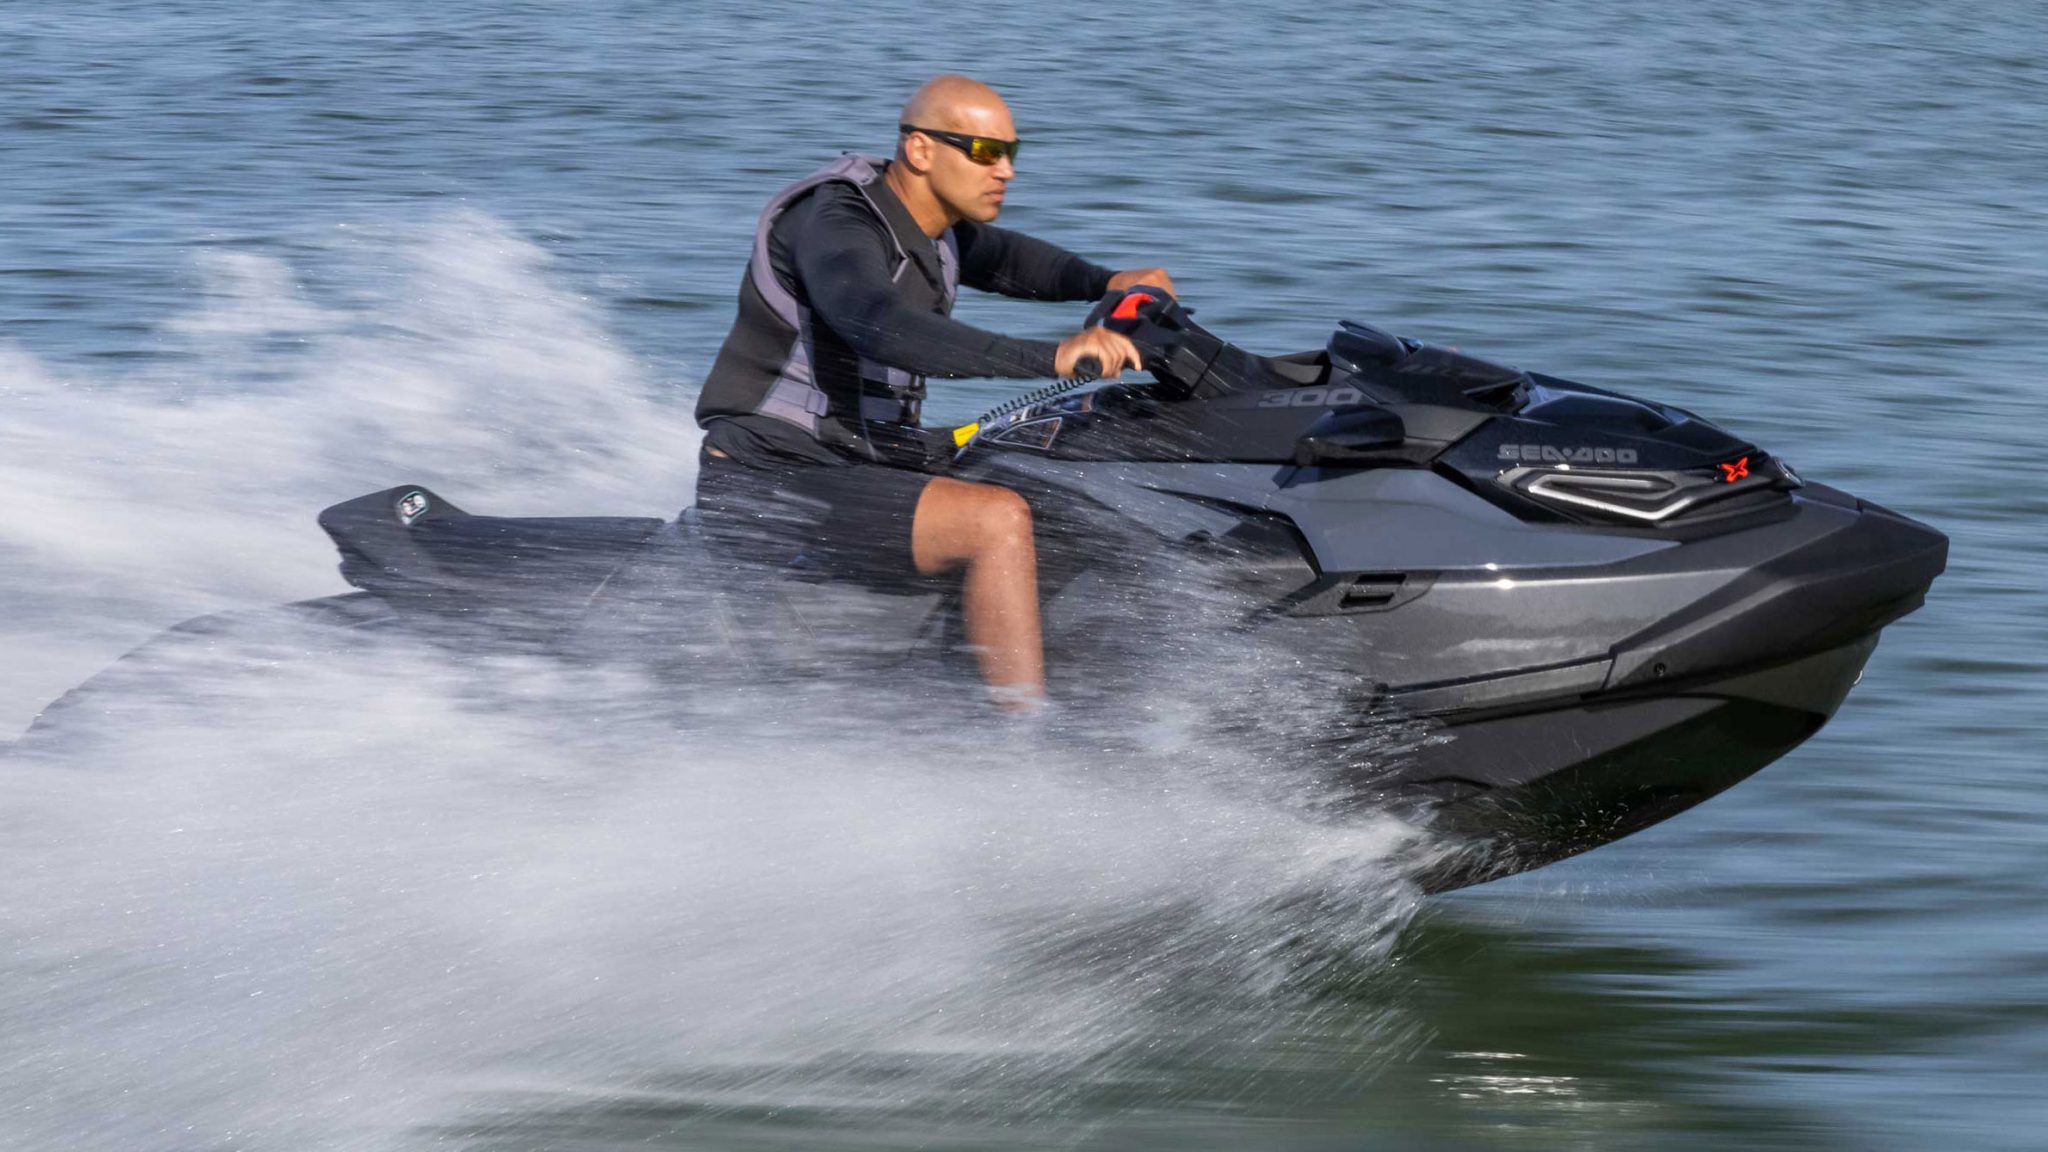 2022 SeaDoo rxpx300 price Archives